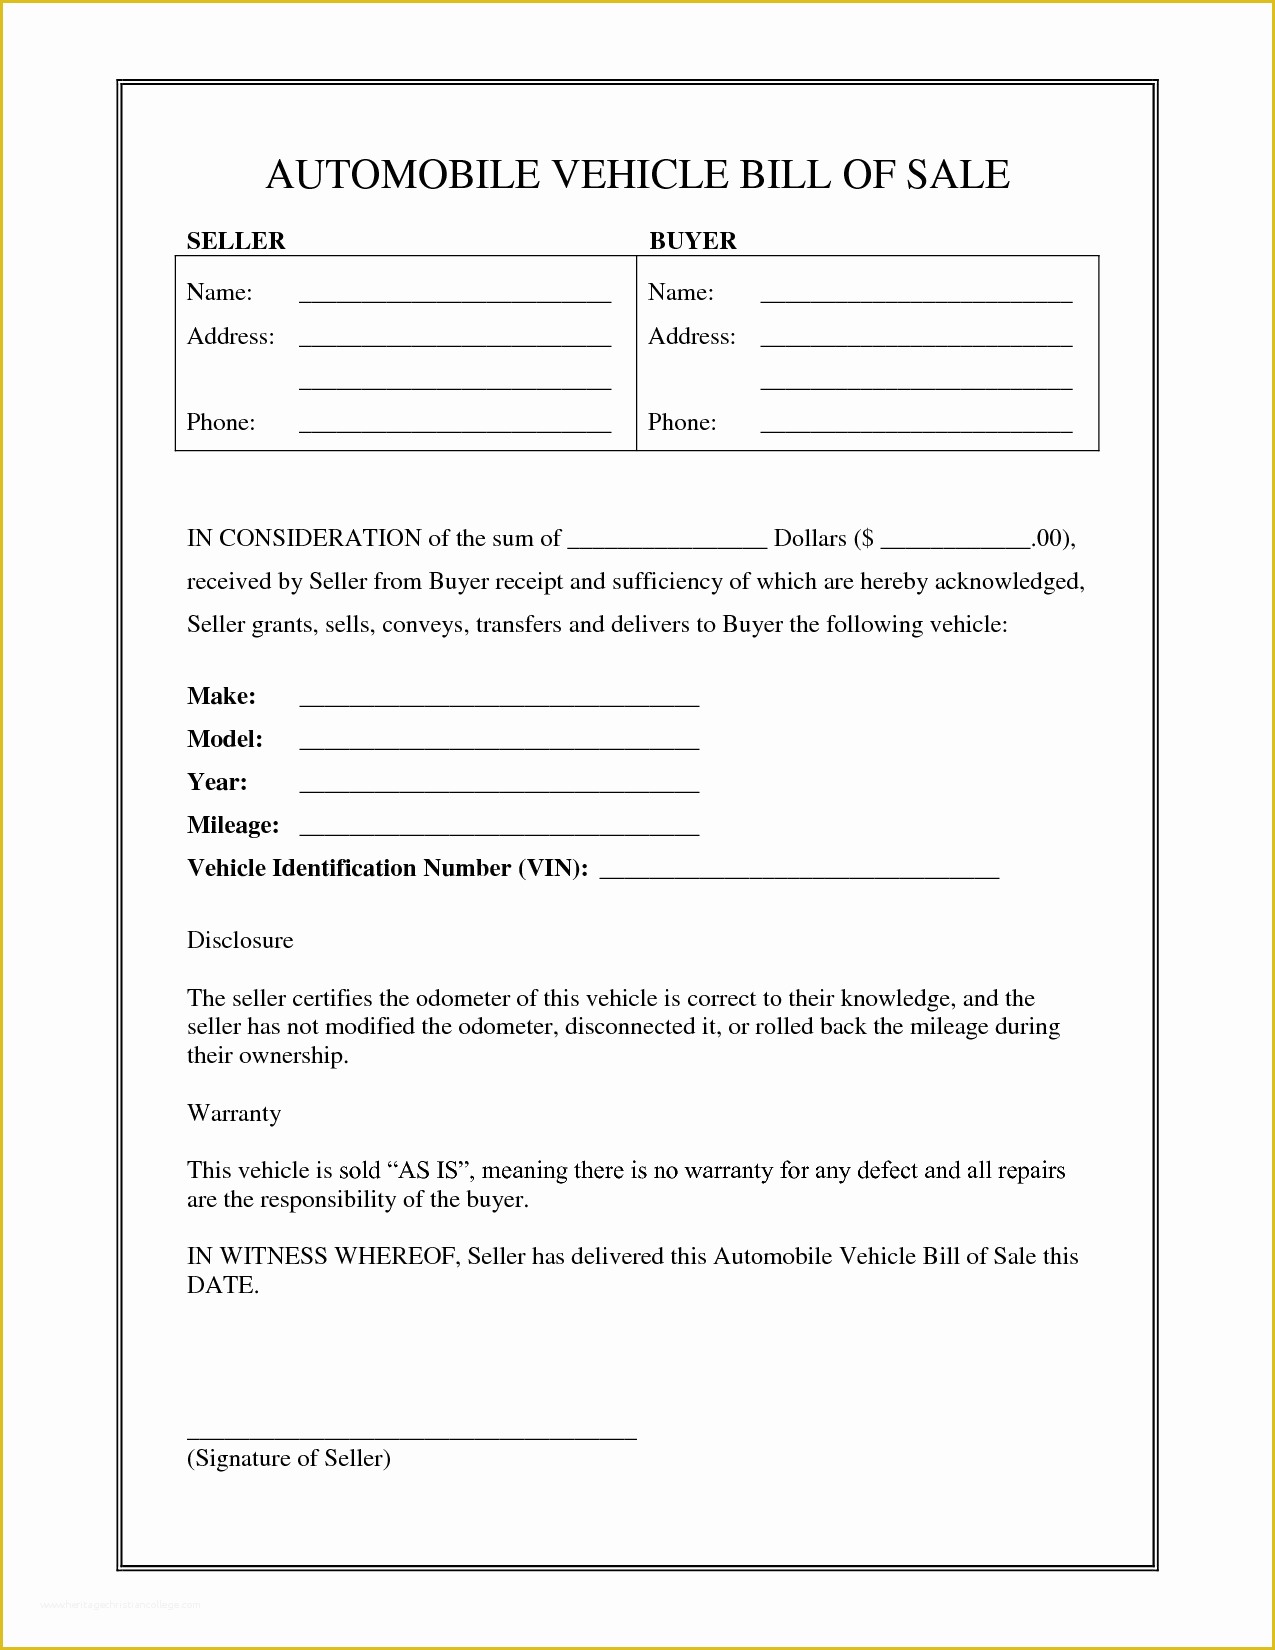 Free Bill Of Sales Template for Used Car as is Of Vehicle Bill Sale Free Printable Documents